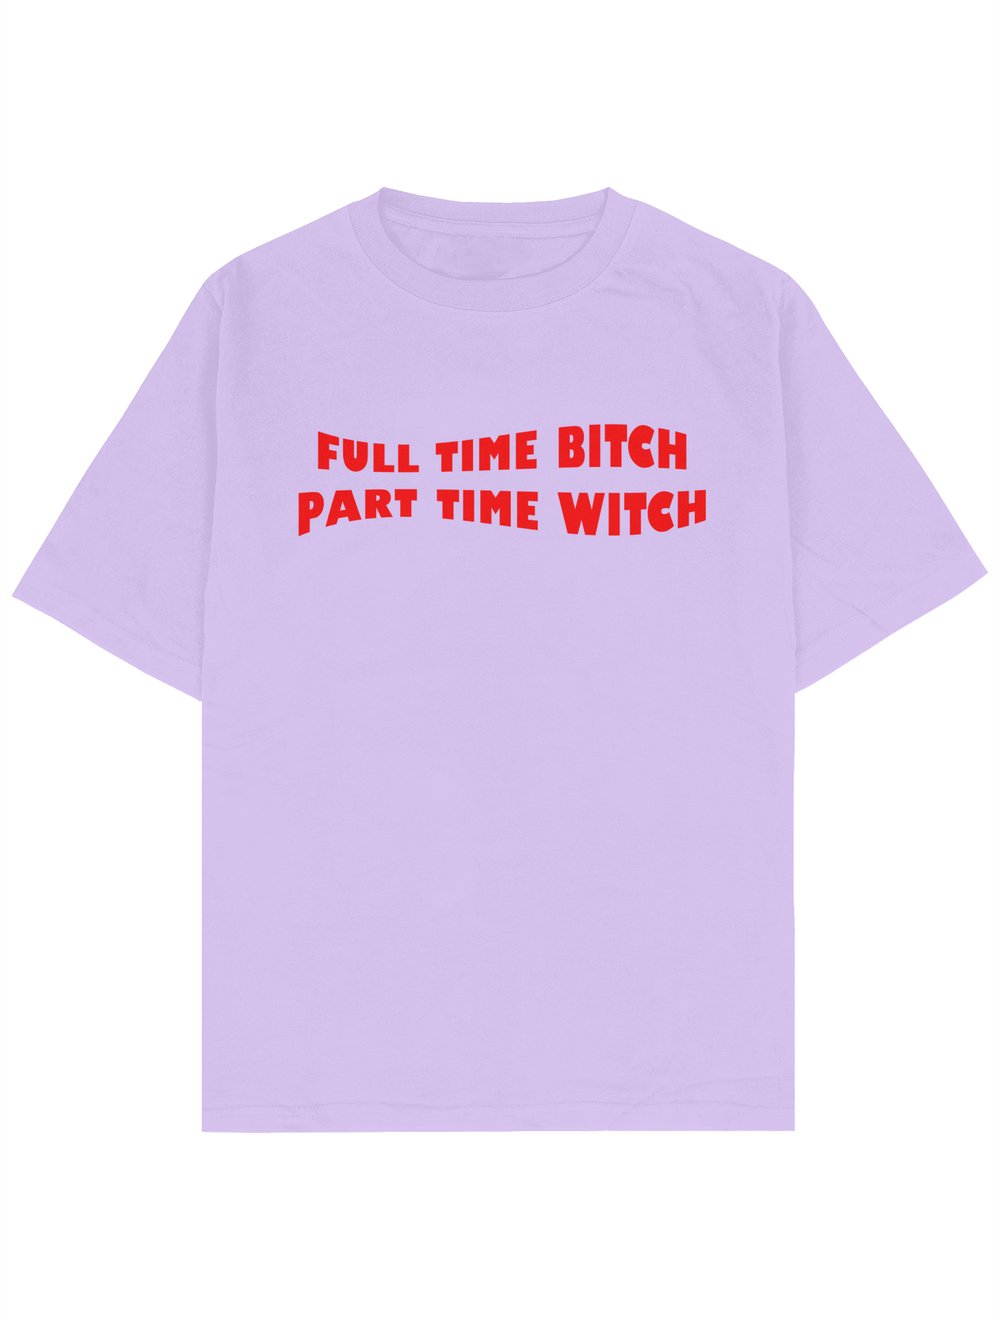 Full Time Bitch Part Time Witch Tshirt